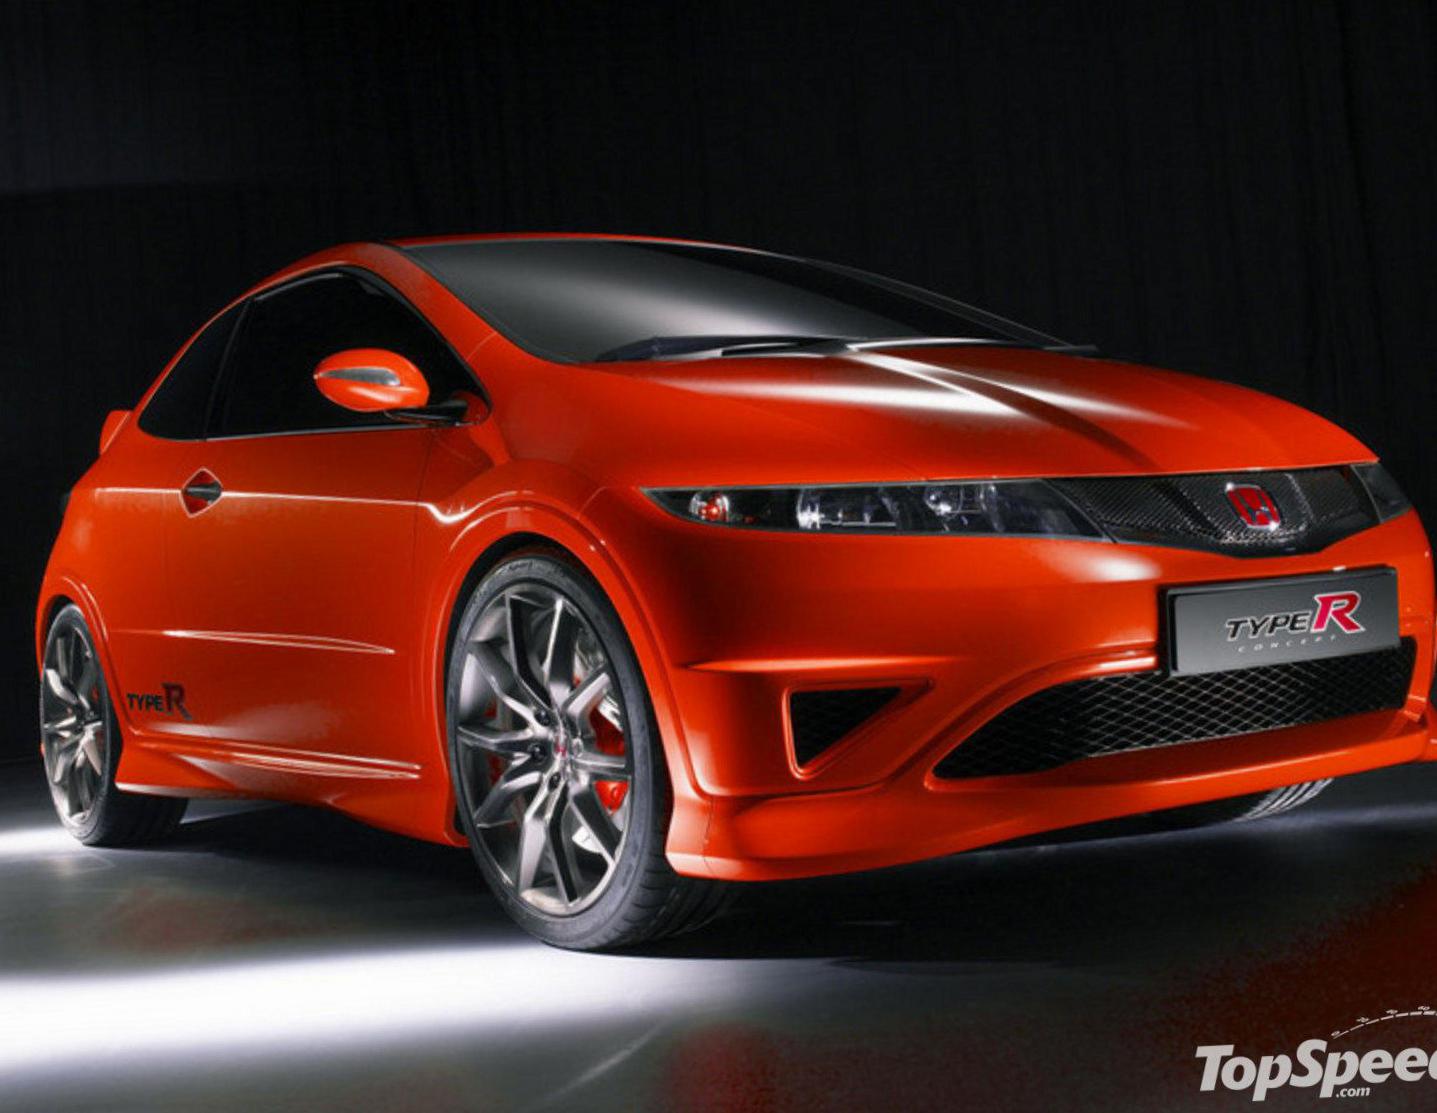 Civic Type R Honda Specifications 2015